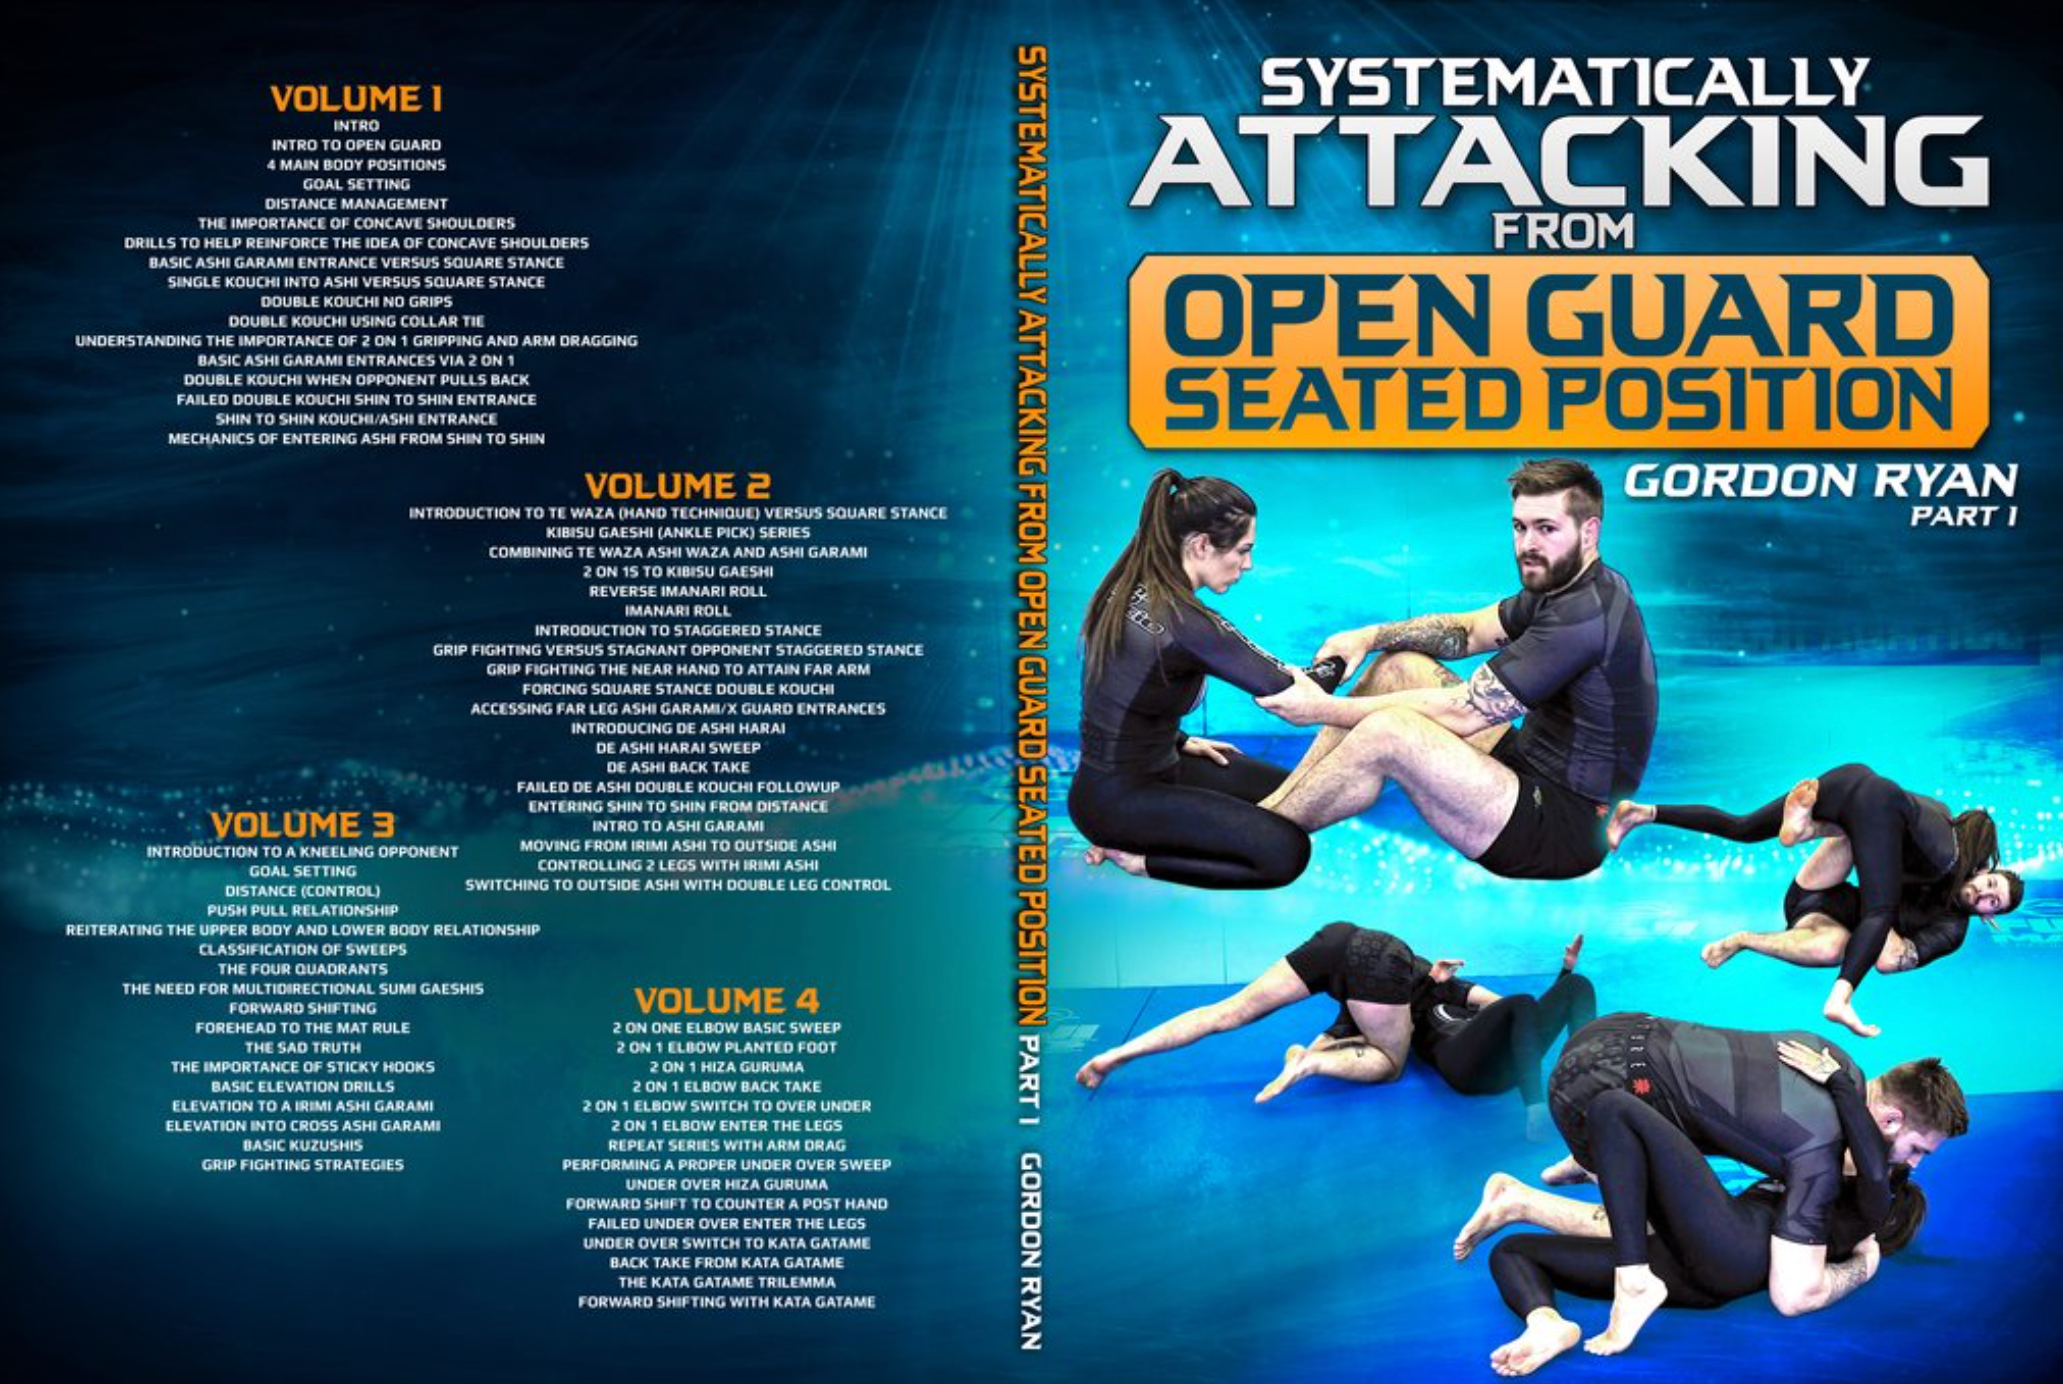 What is Systematically Attacking From Open Guard Seated Position